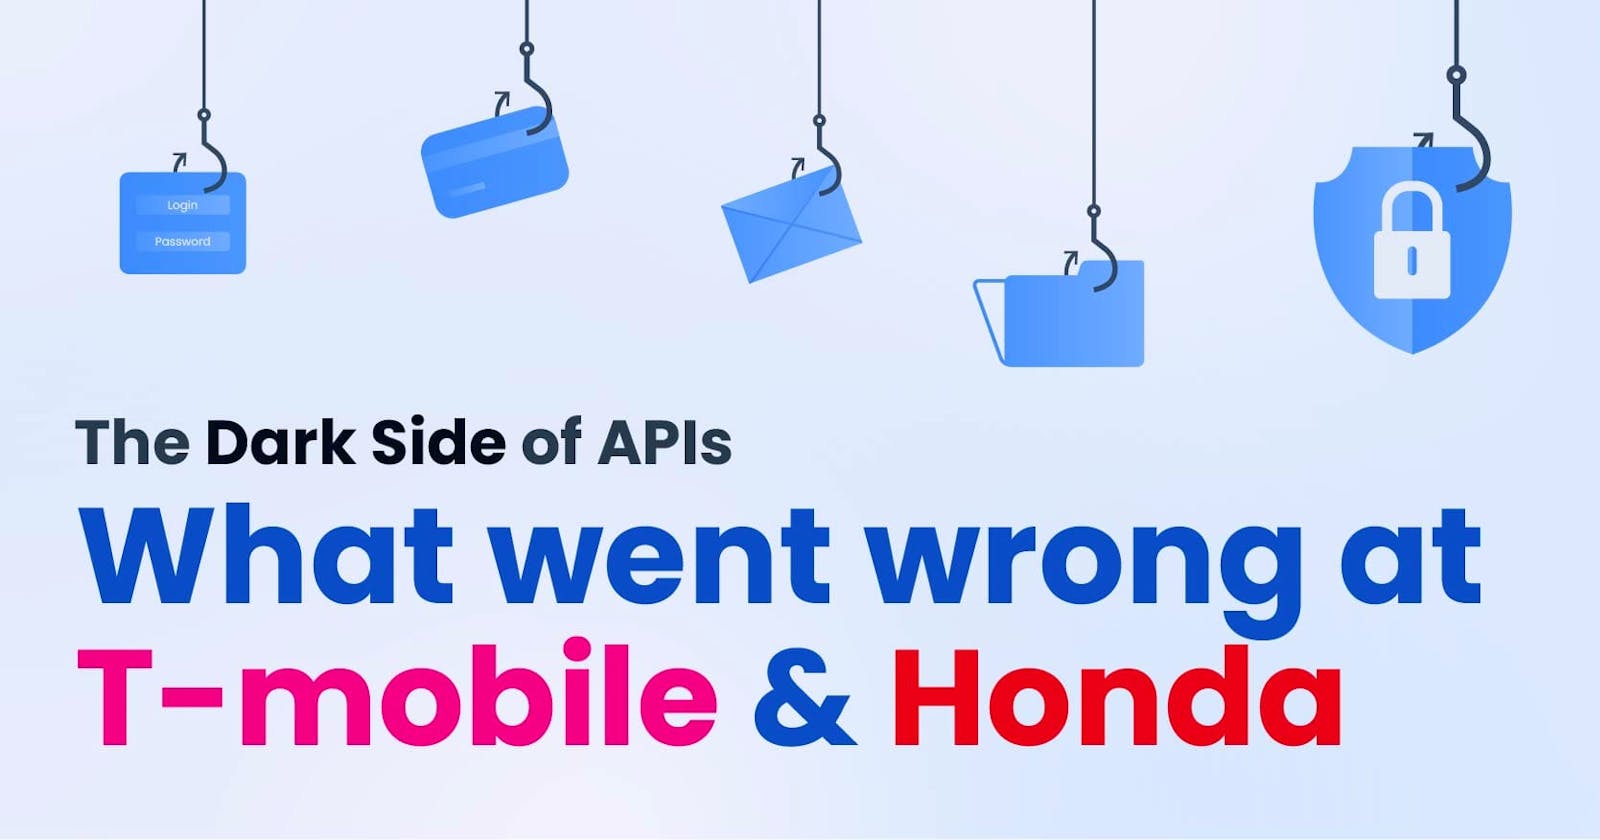 The Dark Side of APIs: What Went Wrong at T-Mobile & Honda